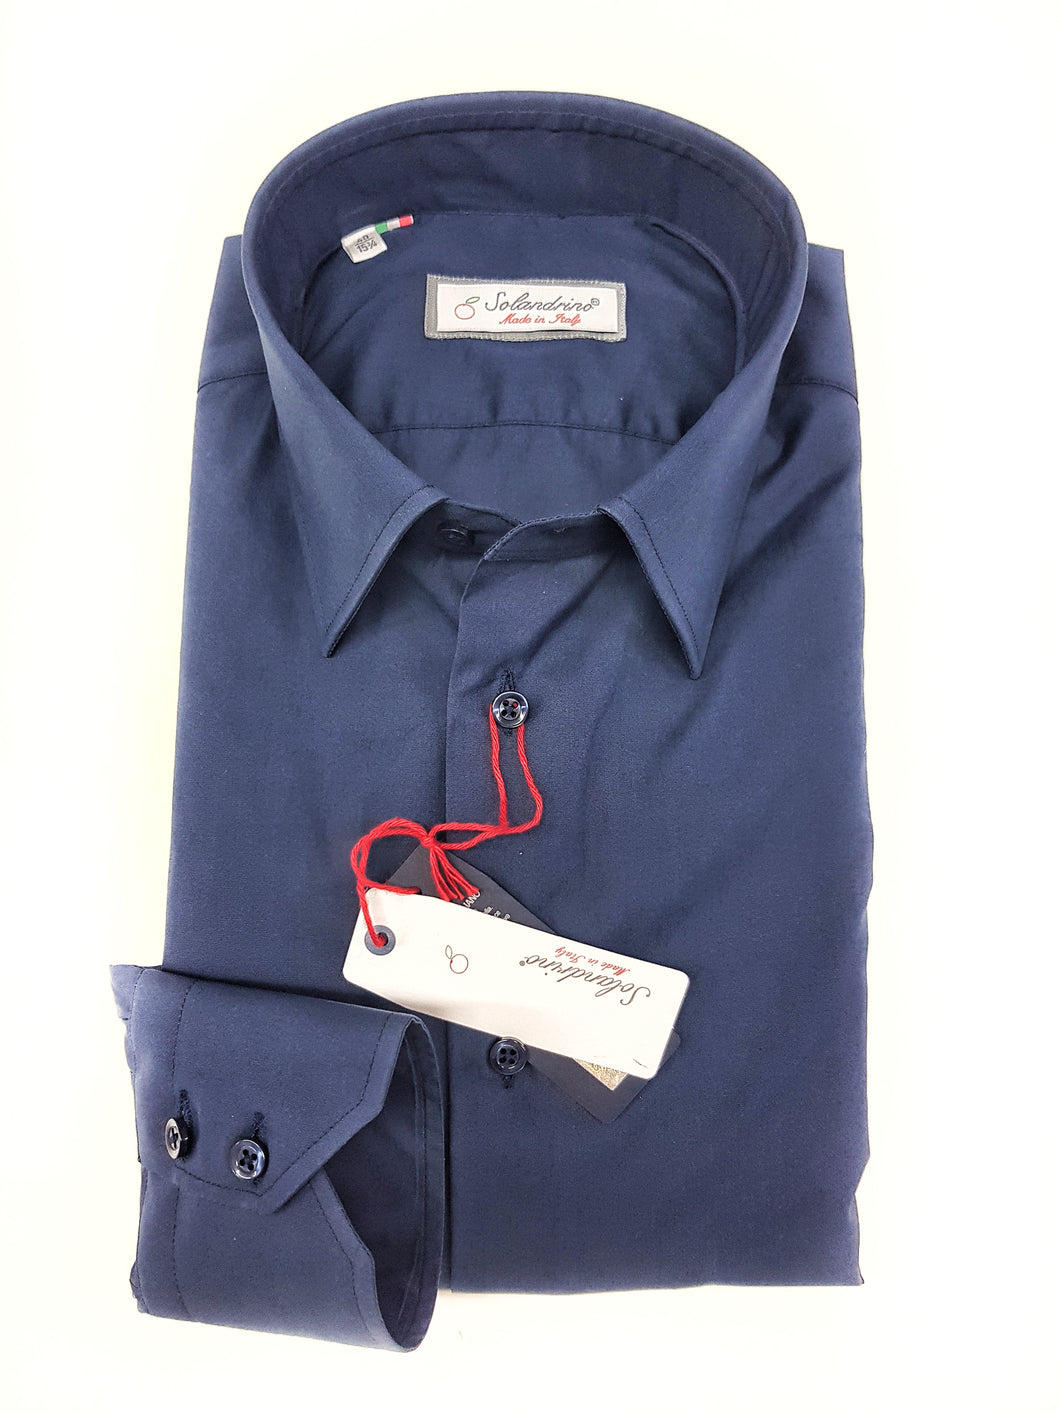 Camicia blu popeline cotone made in italy Blue Navy shirt